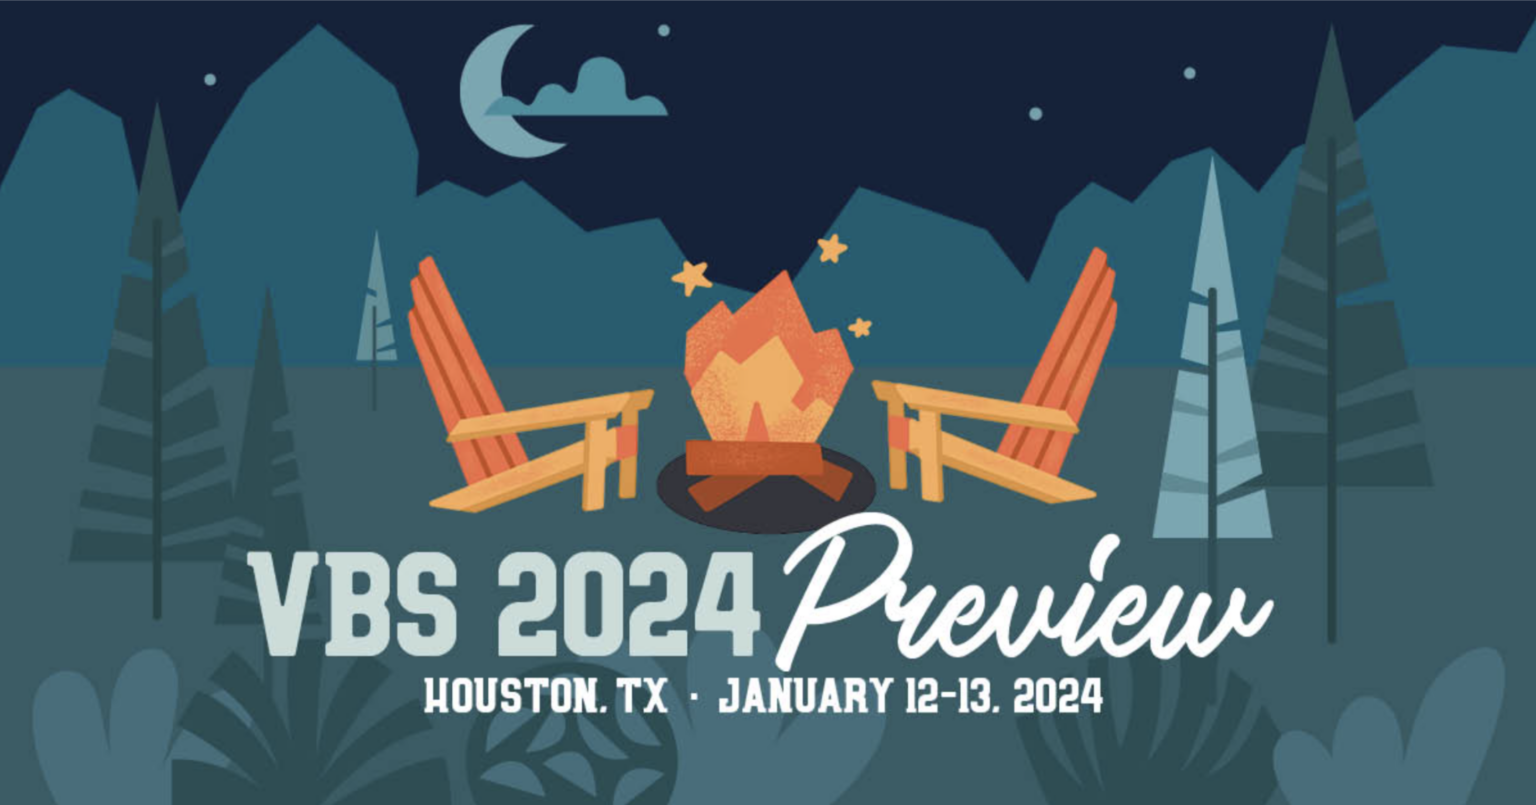 See you at VBS Preview Houston VBS 2024 Vacation Bible School